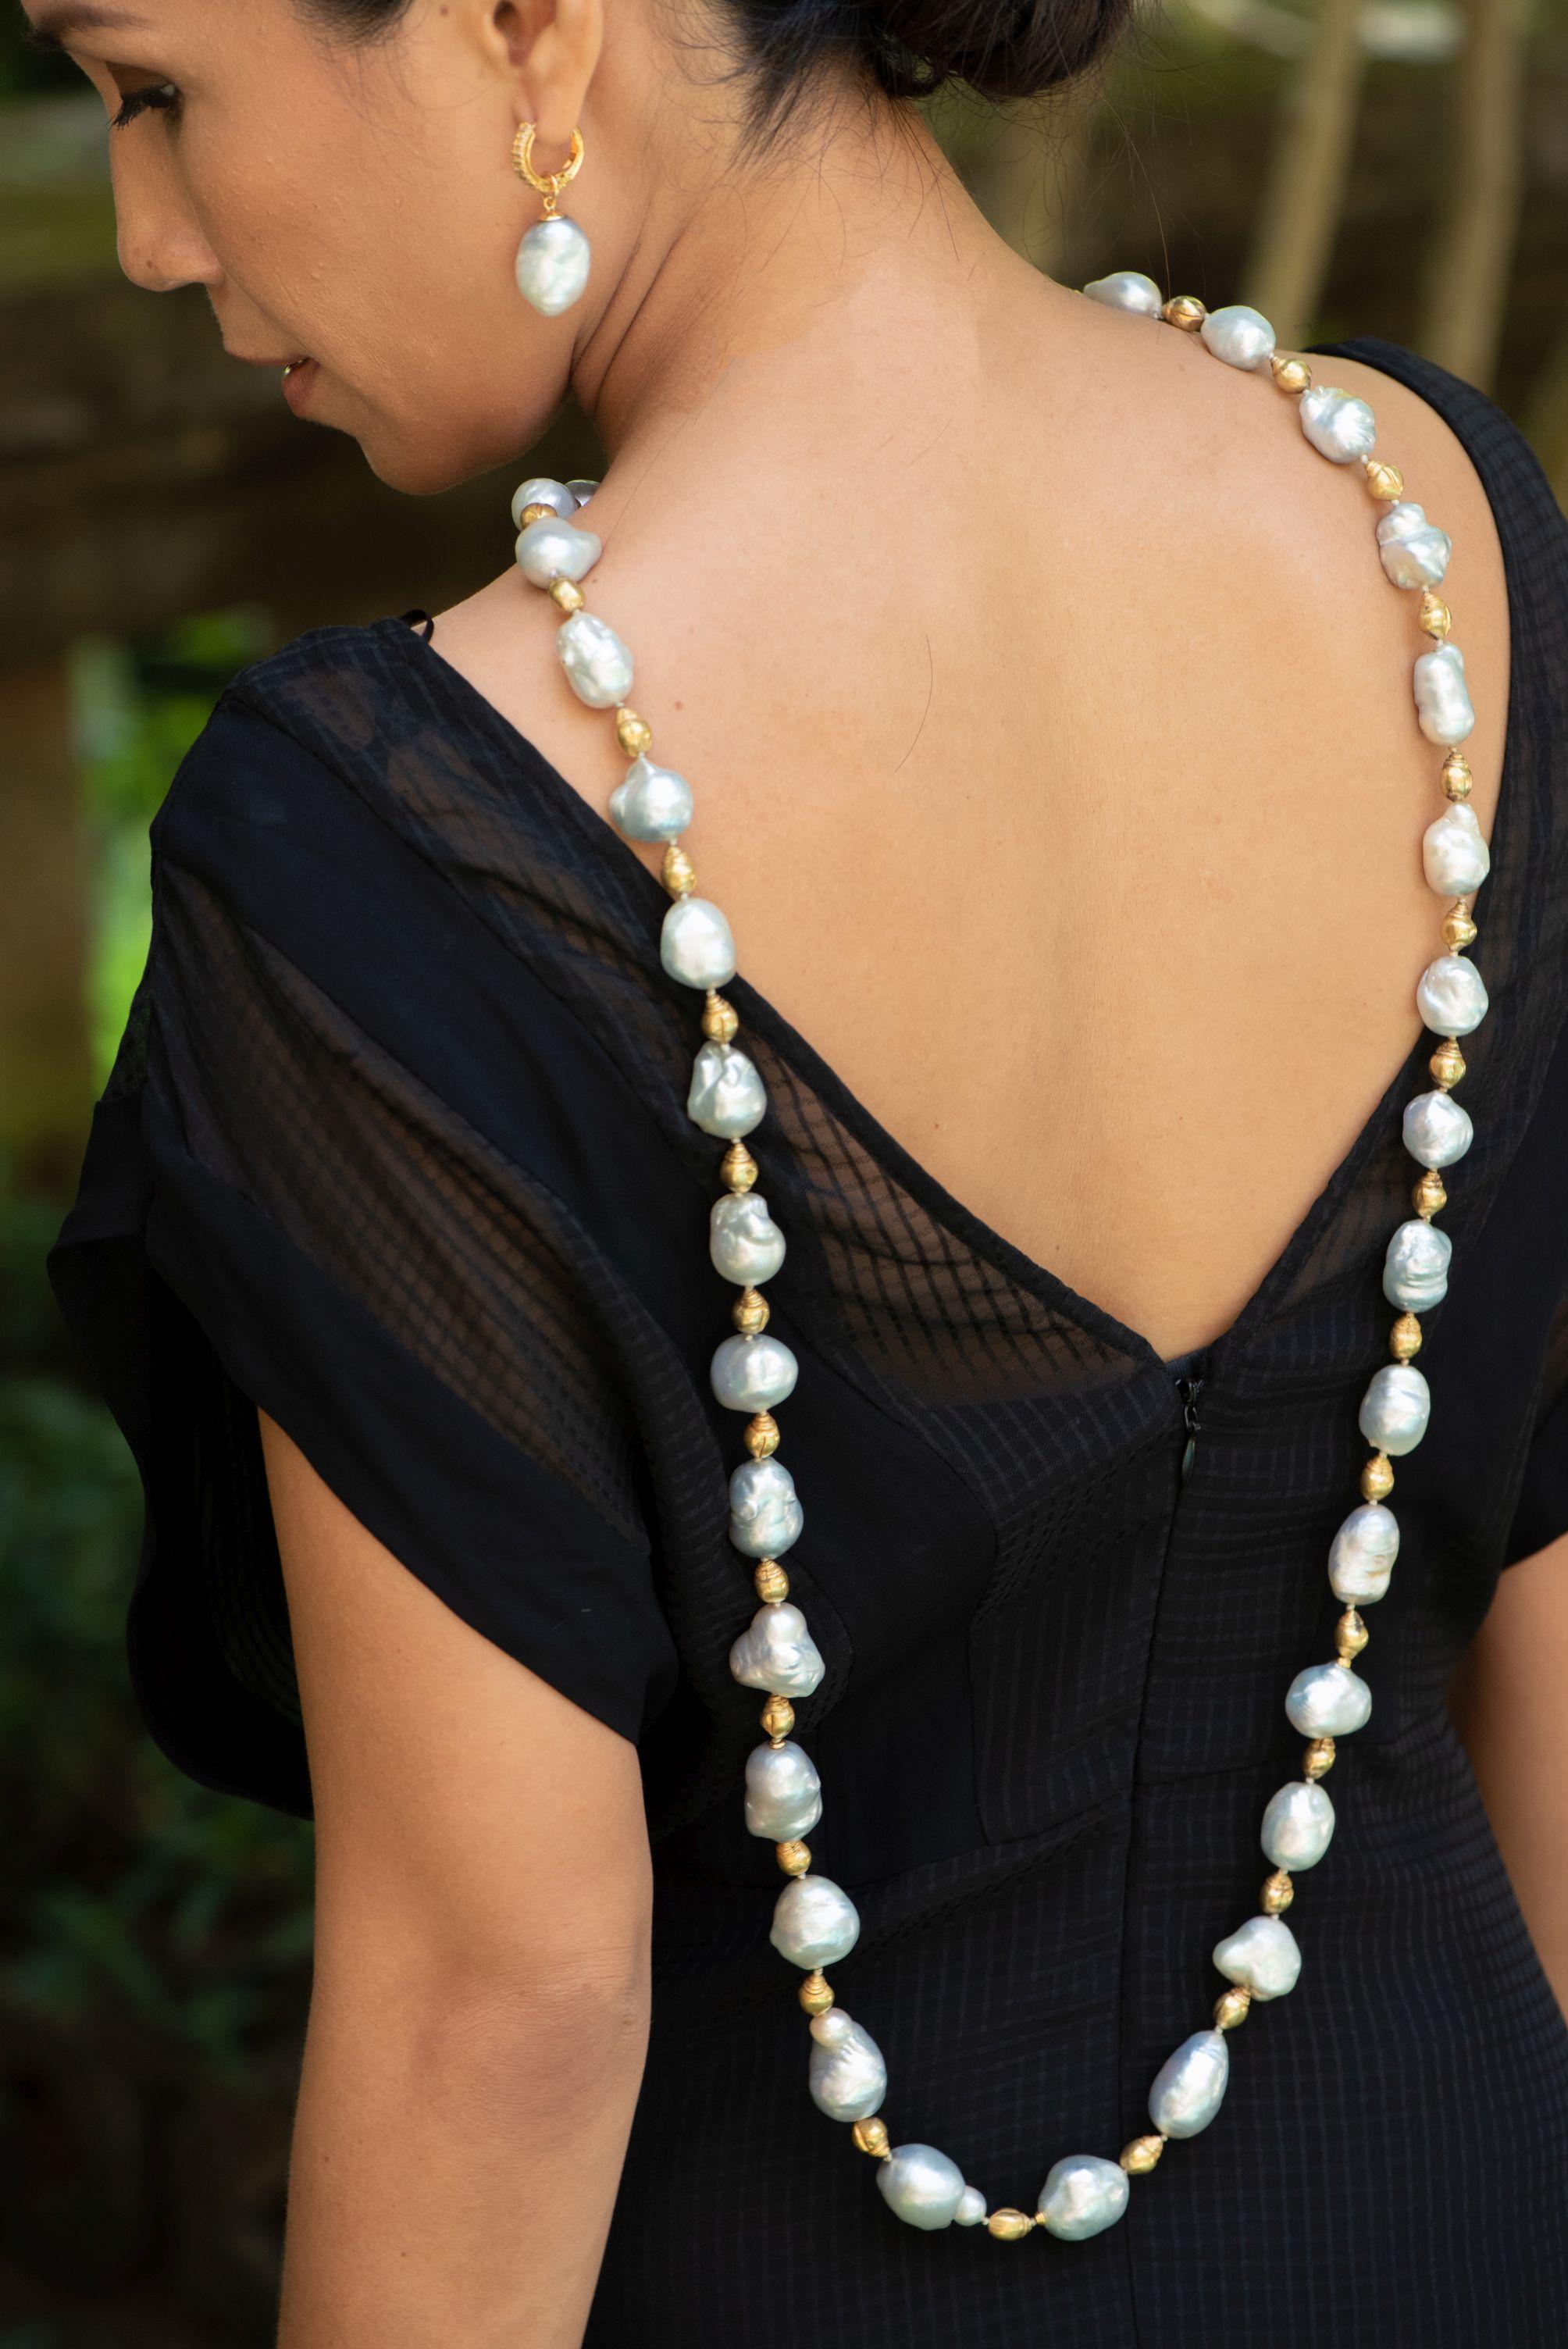 Uncut 14 Century Gold Beads Oversized Blueish Baroque South Sea Pearls Beaded Necklace For Sale